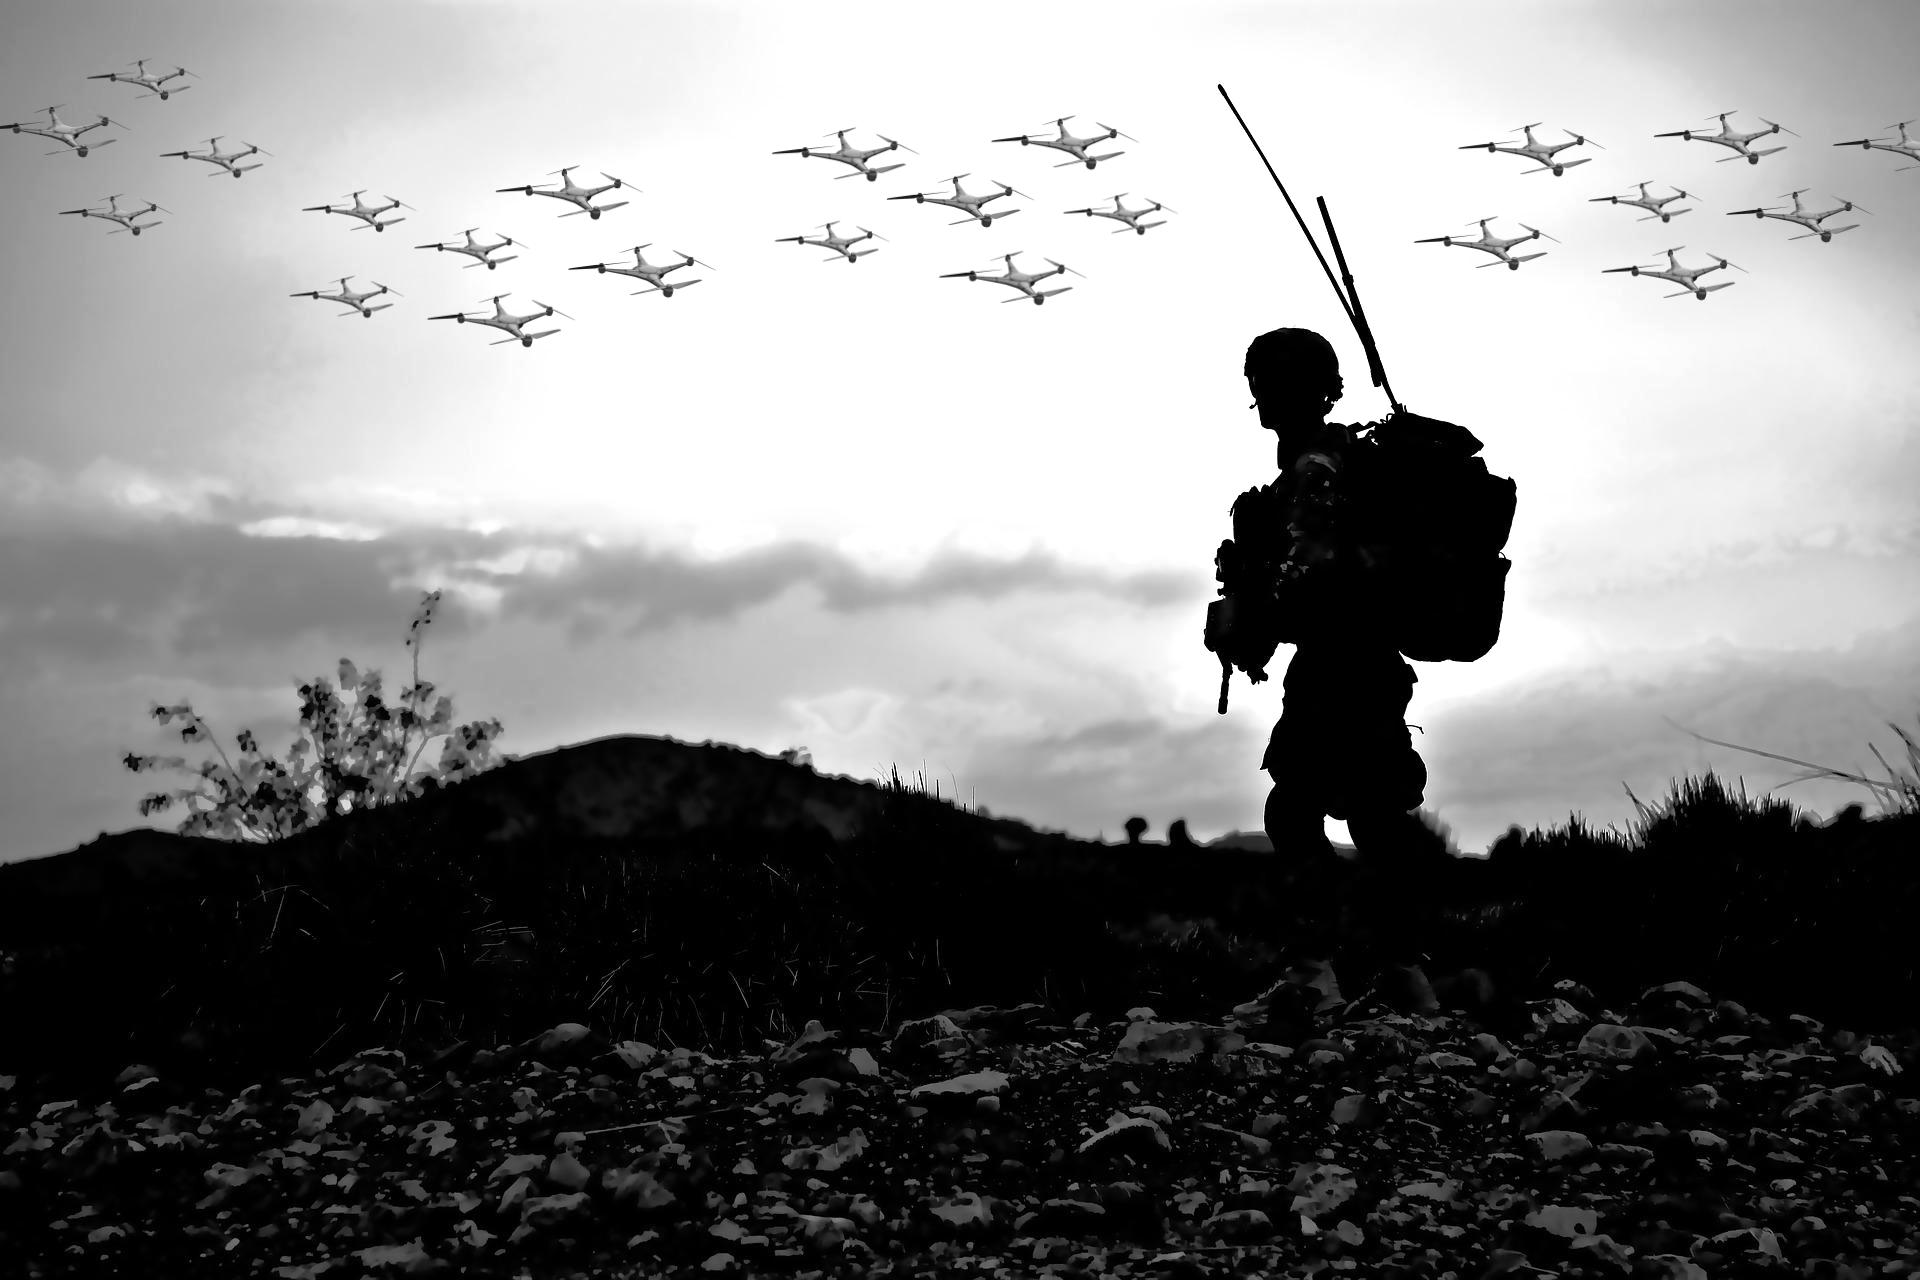 HLS.Today DARPA US Army Deploys 40 Drones for Swarm-Enabled Tactics Program